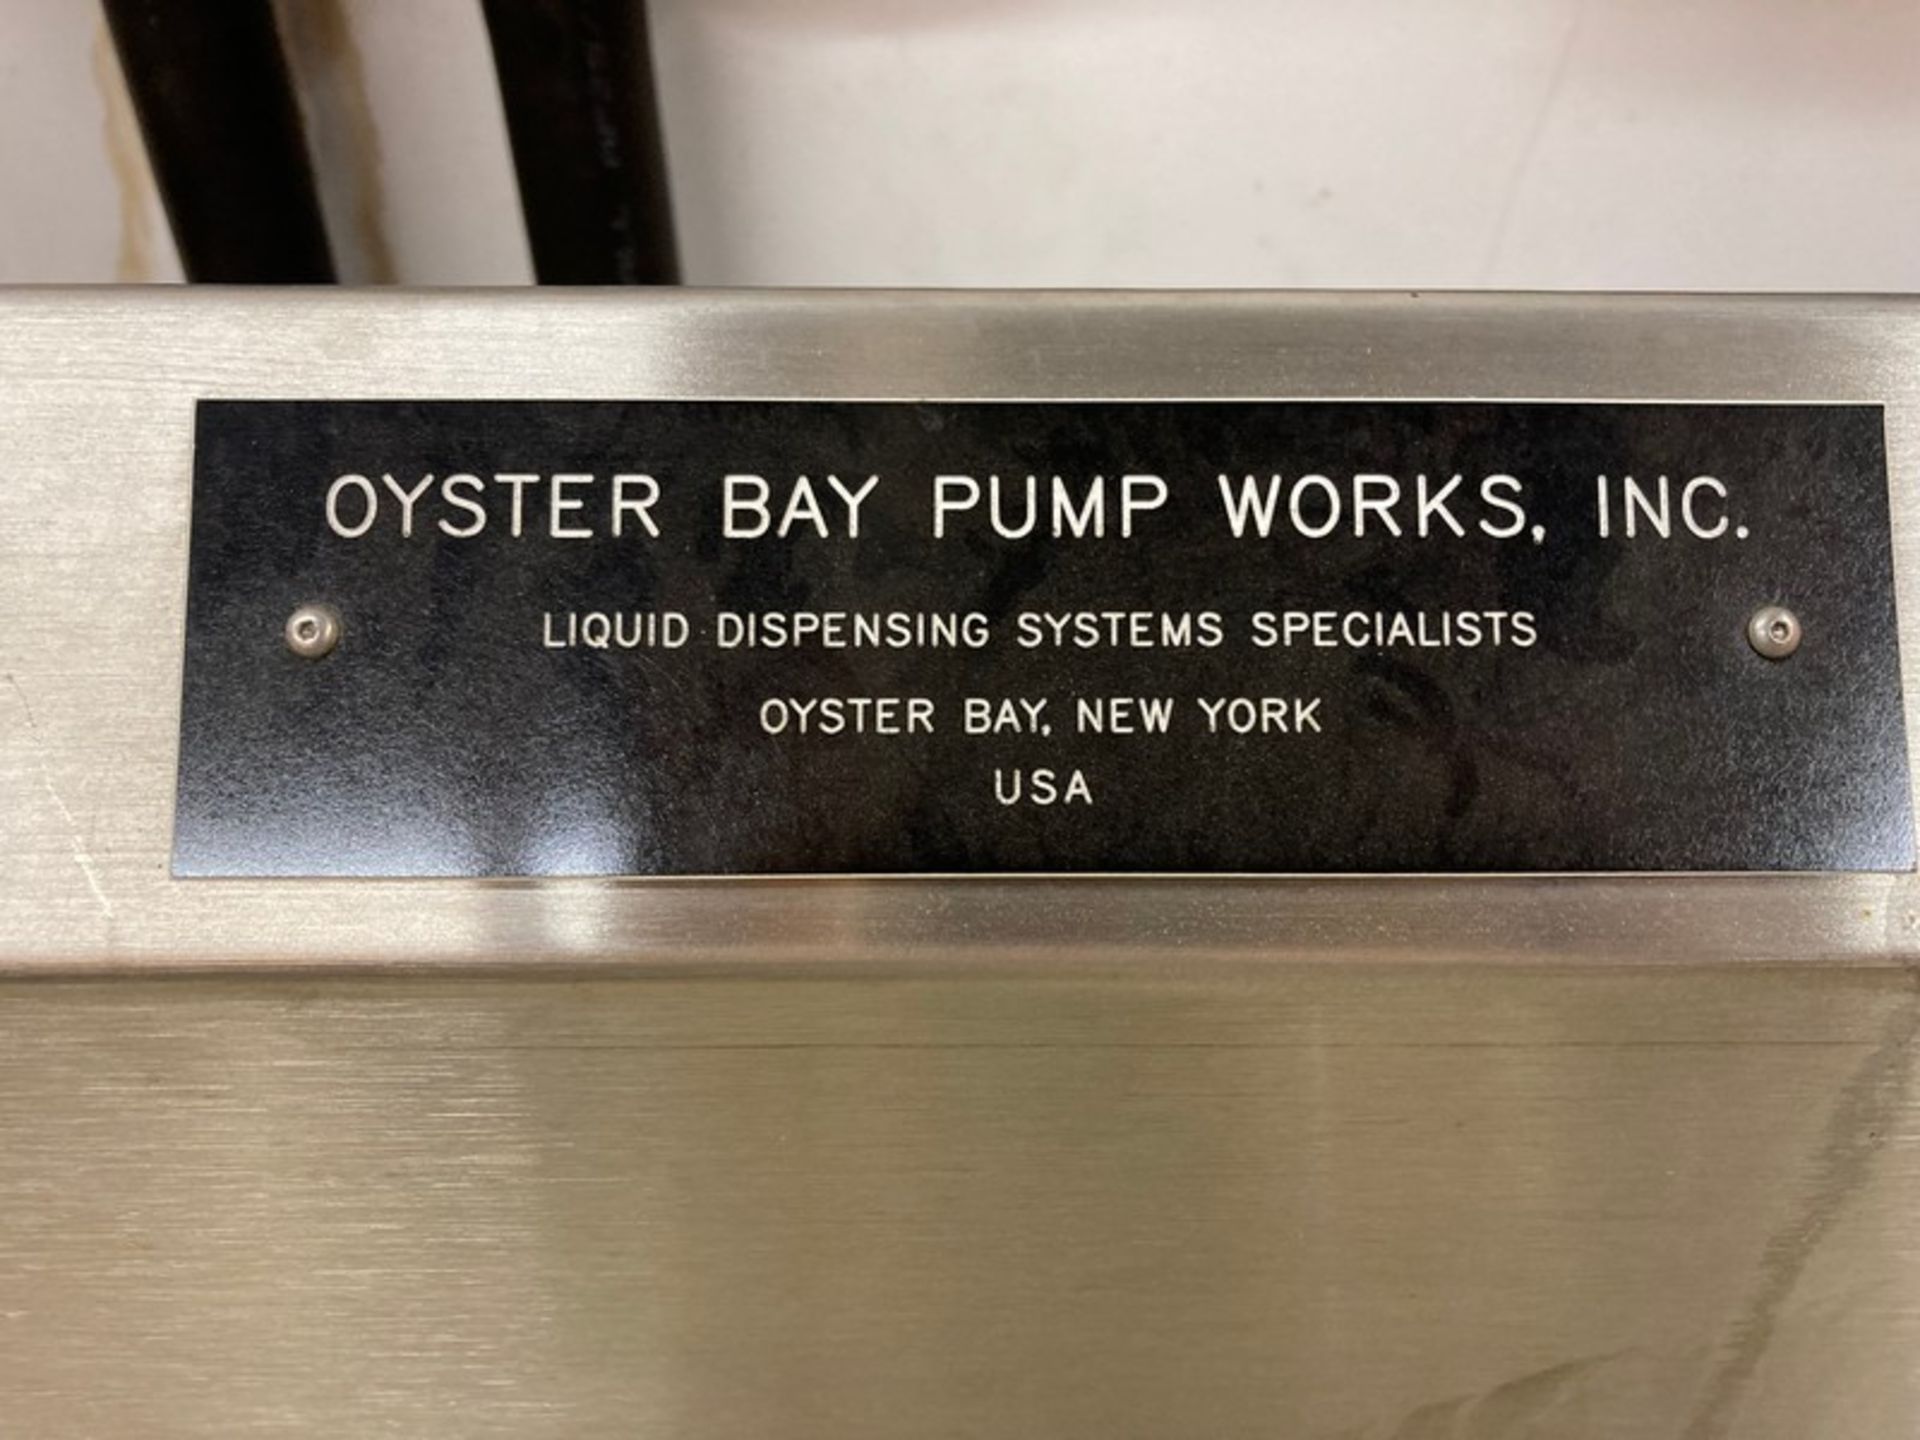 1 Oyster Bay Pump Liquid Dispensing System with 19 glass beakers on stainless steel rolling cart ( - Image 3 of 5